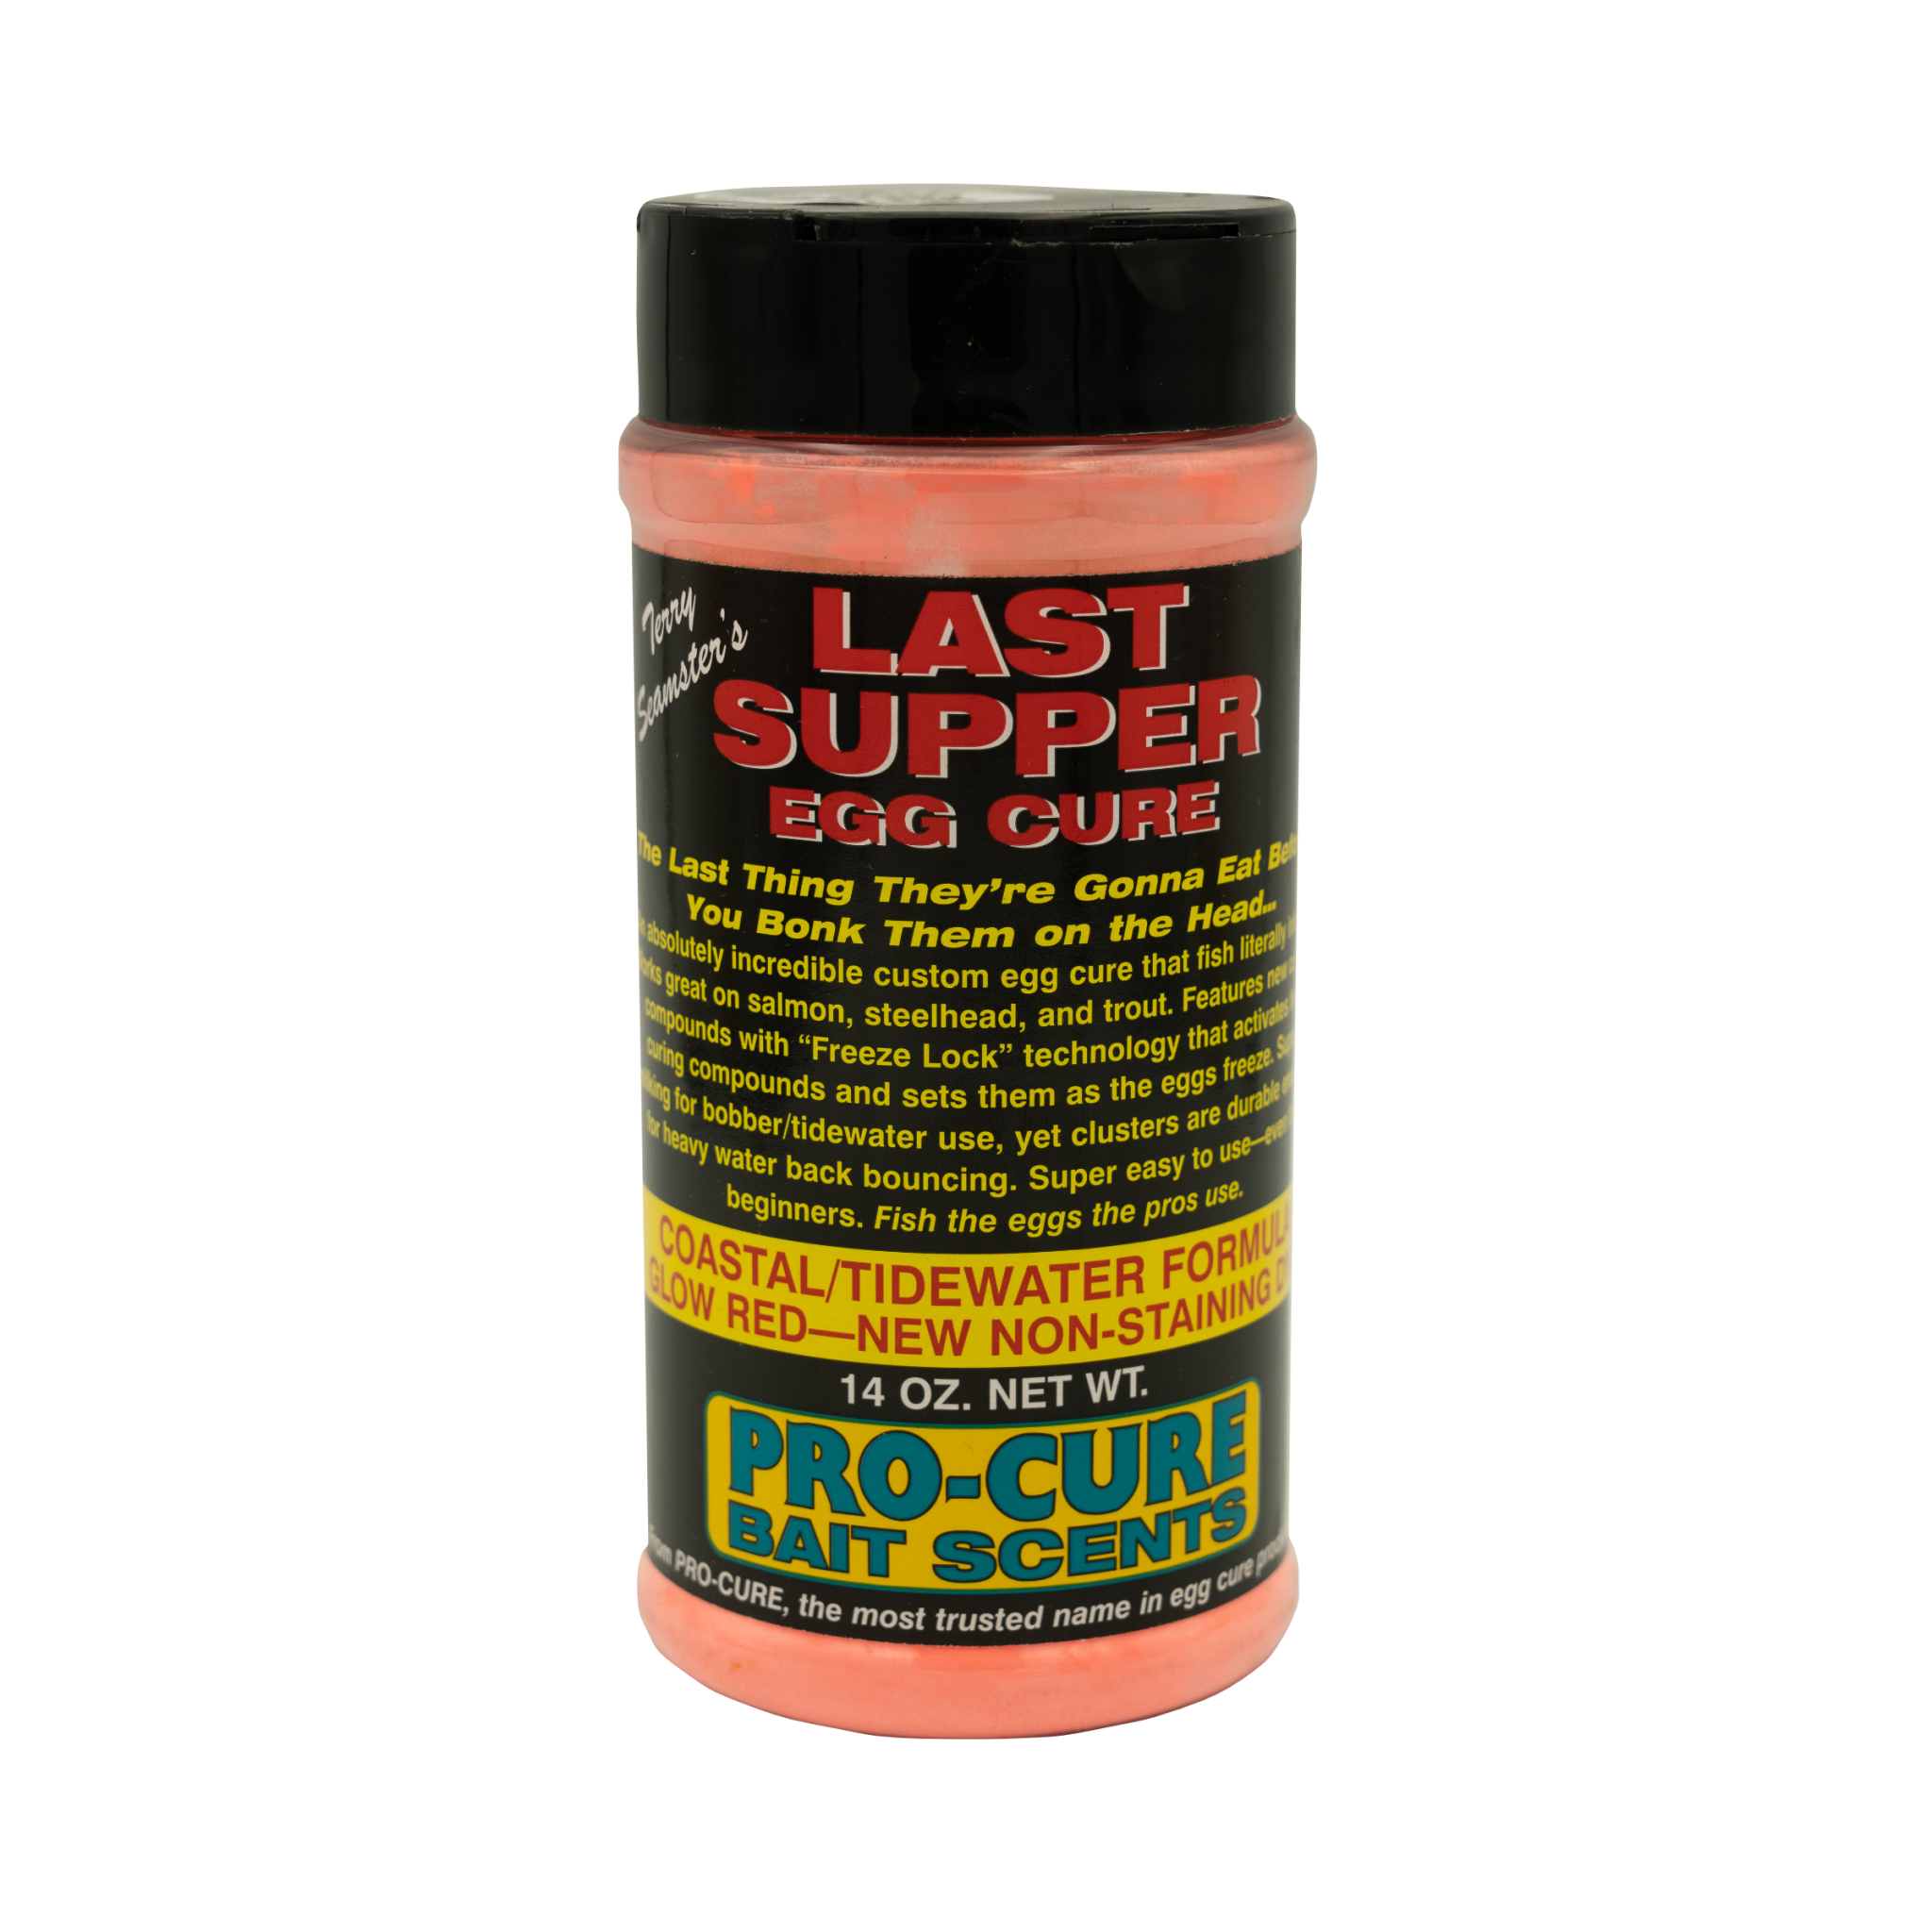 LAST SUPPER COASTAL/TIDEWATER GLO RED EGG CURE – Pro